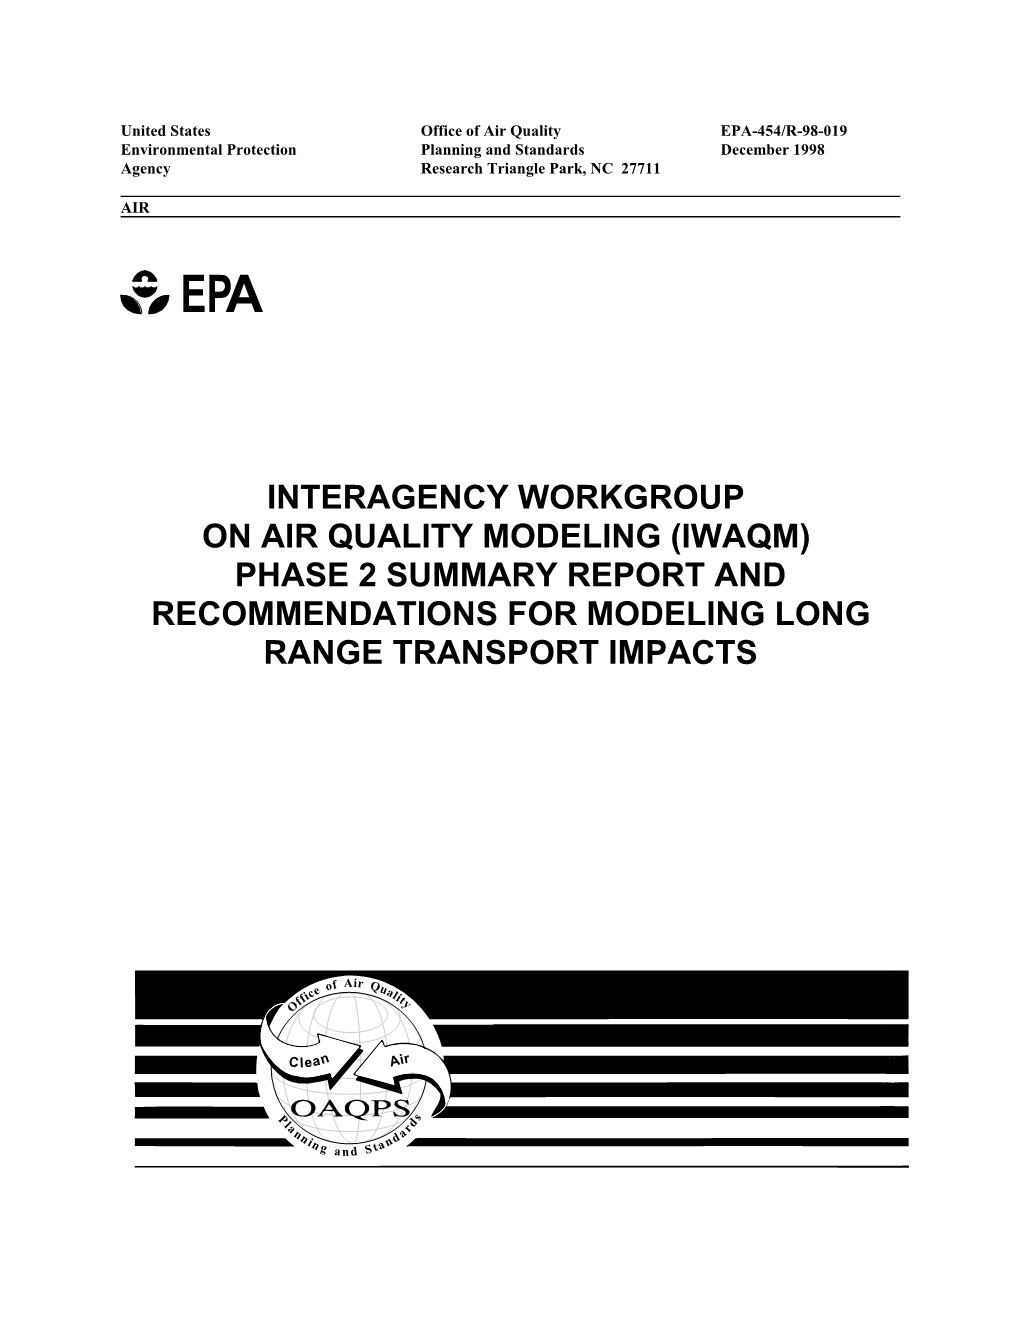 Phase 2 Summary Report and Recommendations for Modeling Long Range Transport Impacts